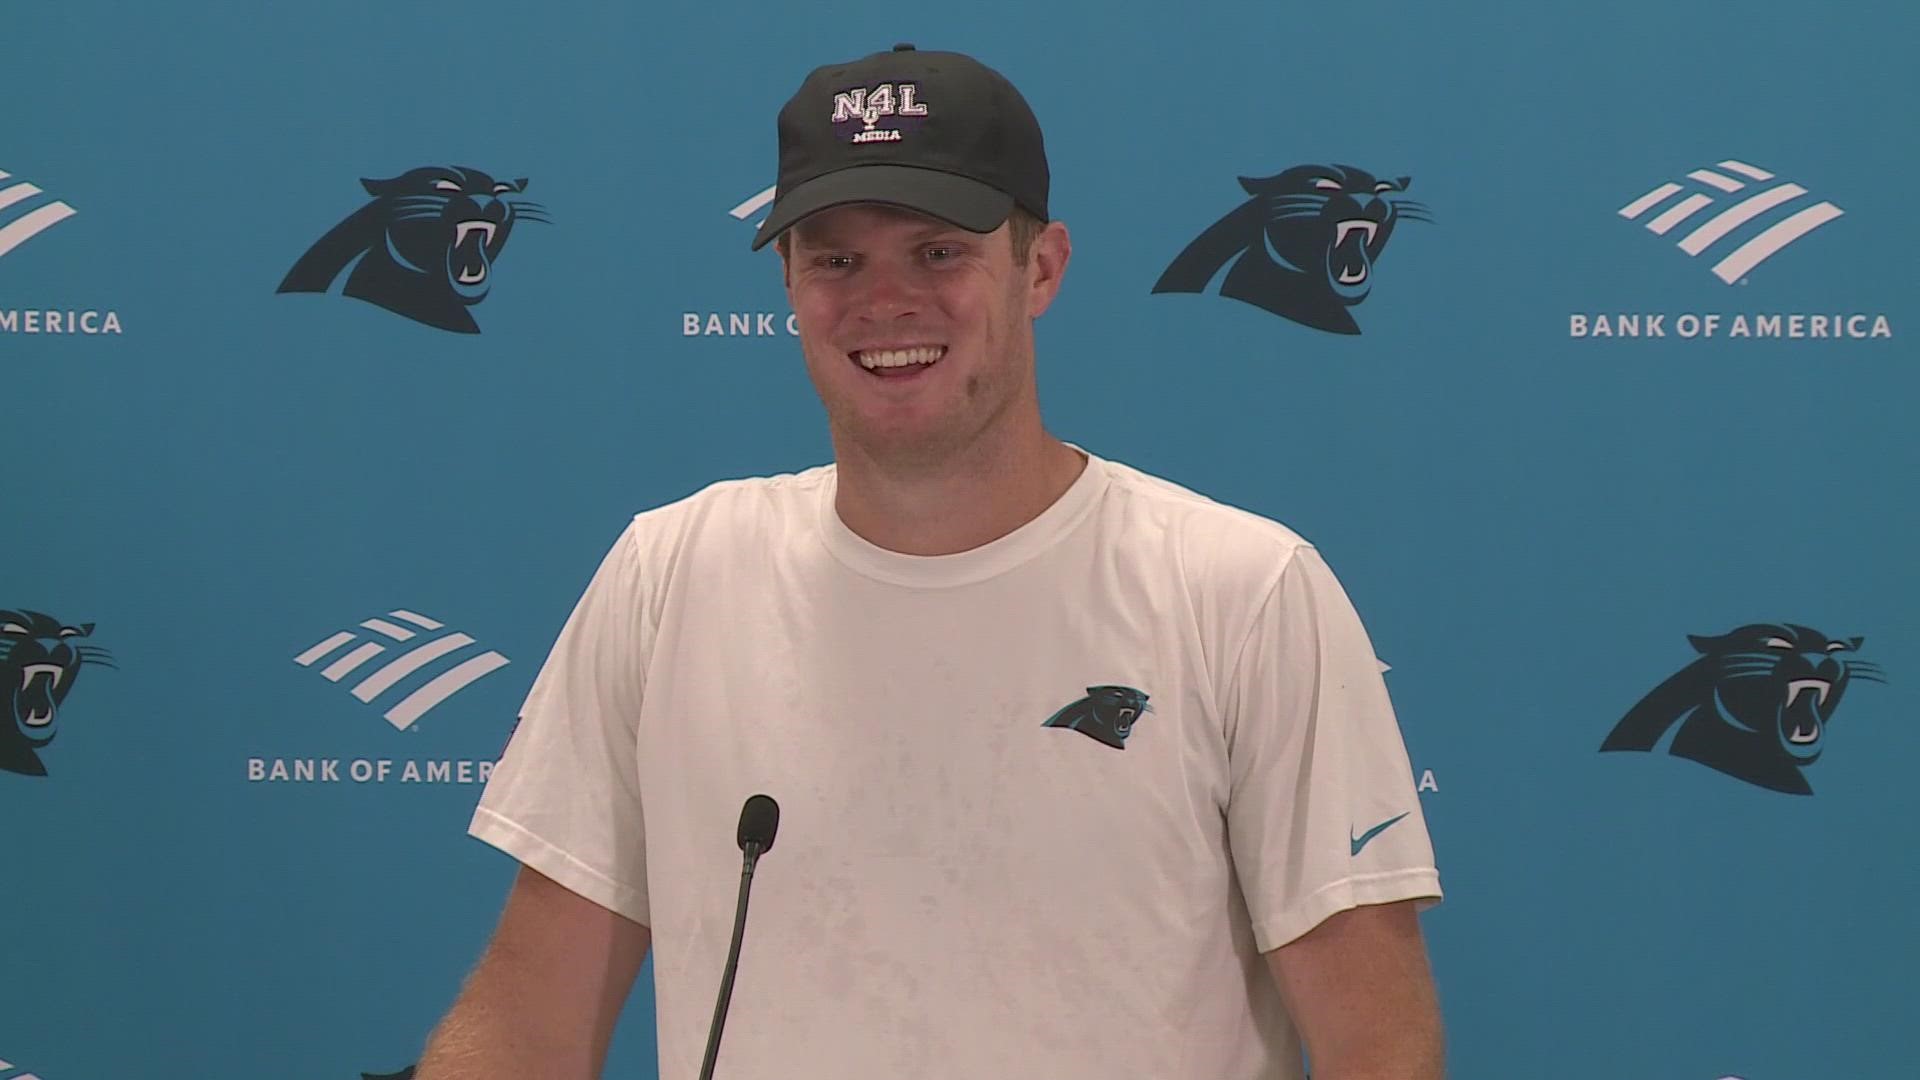 The new Carolina Panthers quarterback didn't provide his old team, the New York Jets, with any bulletin board material ahead of Sunday's opening game in Charlotte.